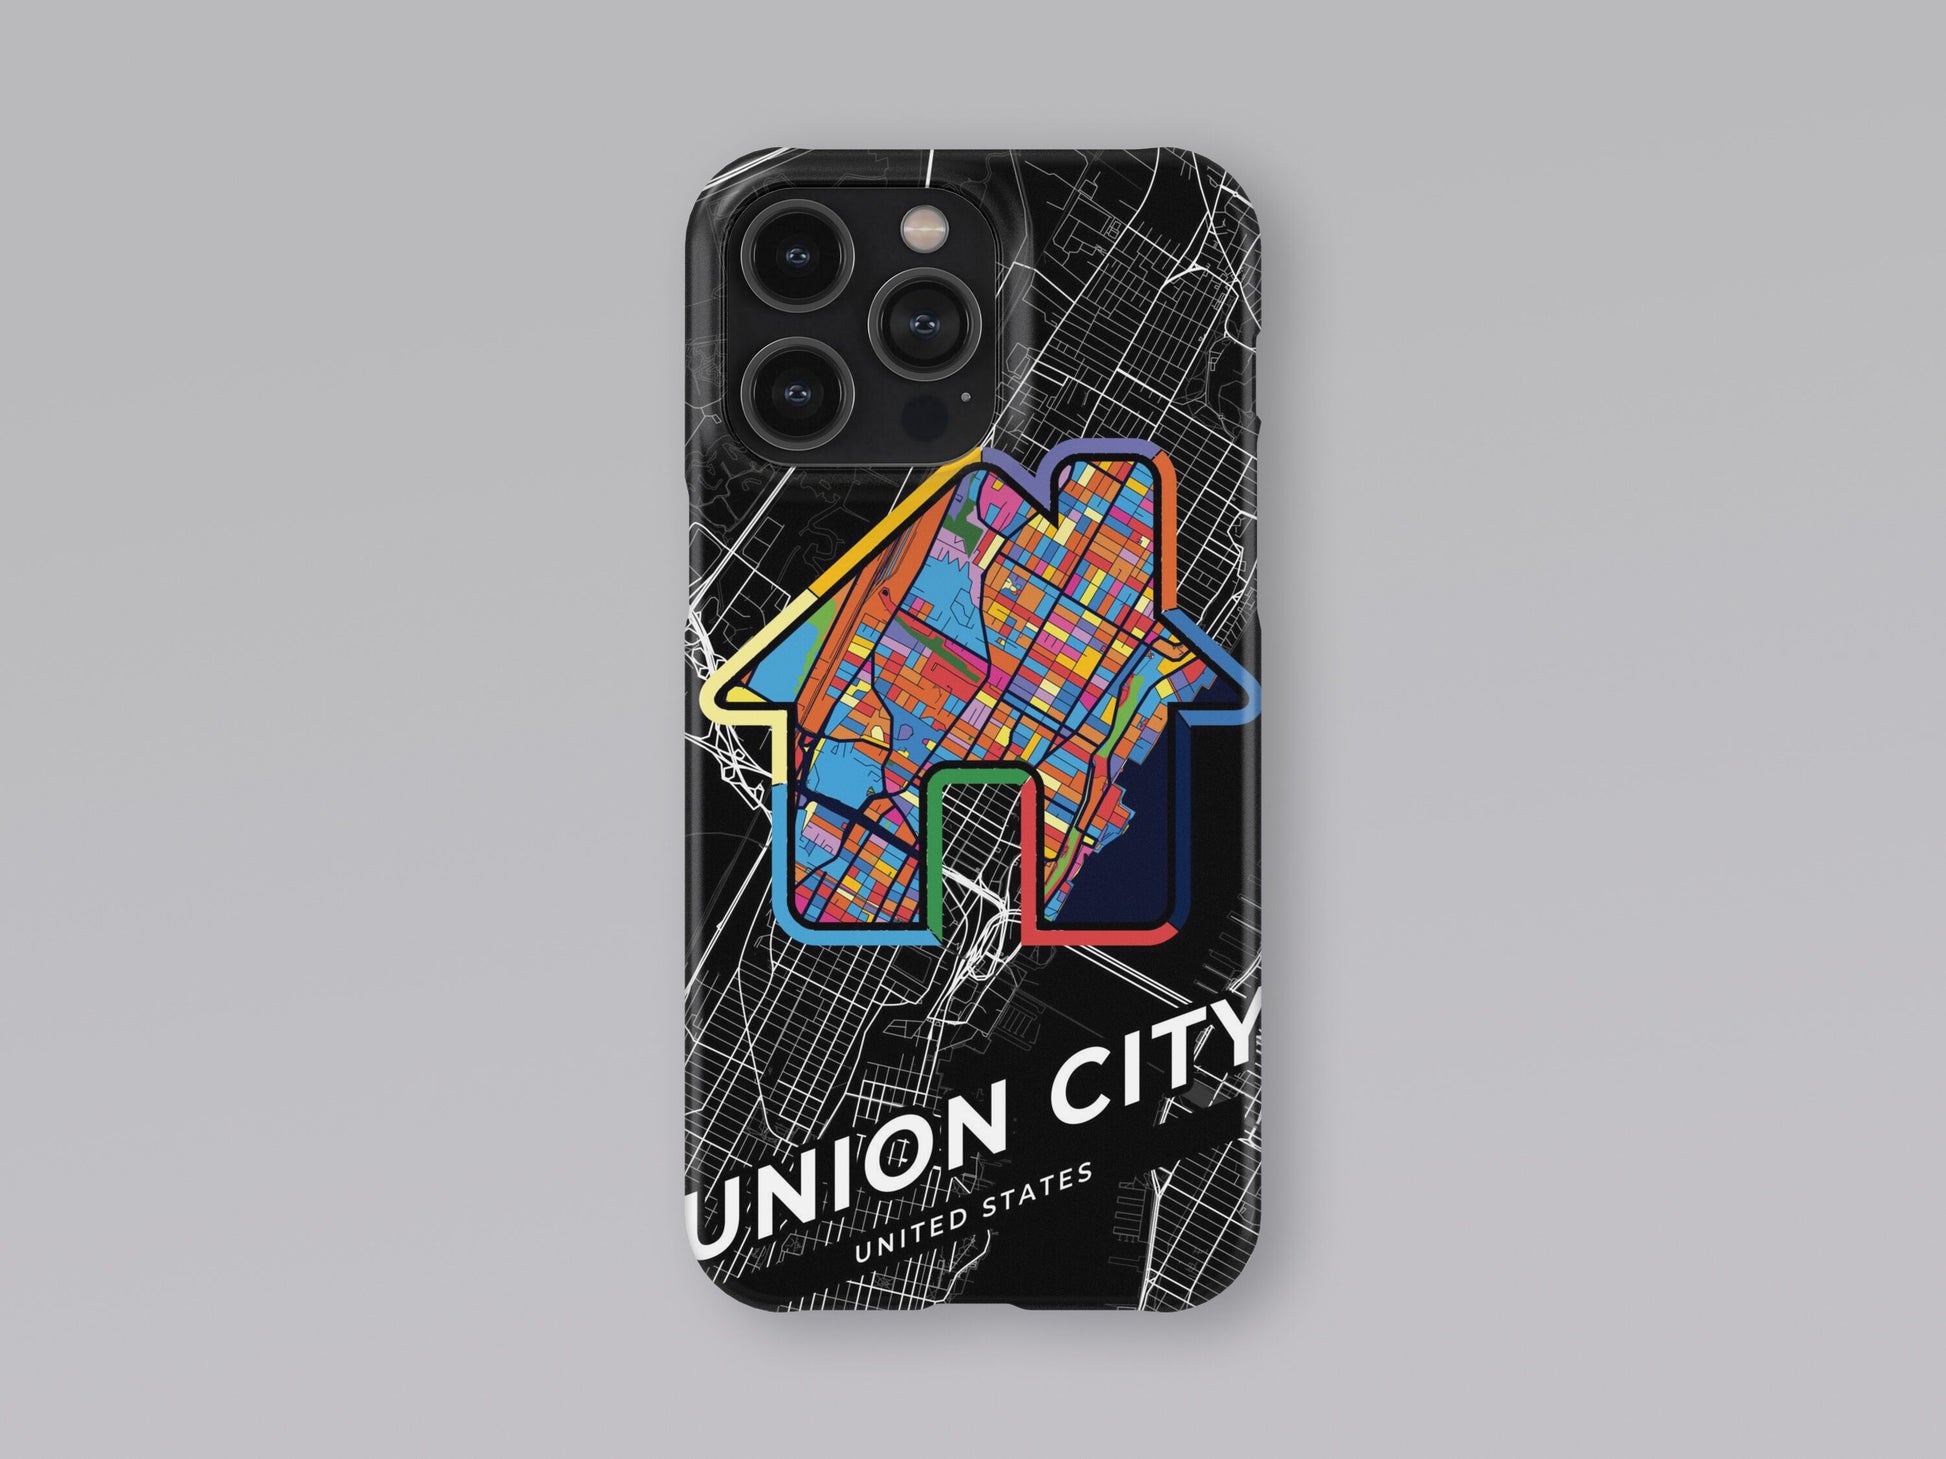 Union City New Jersey slim phone case with colorful icon 3